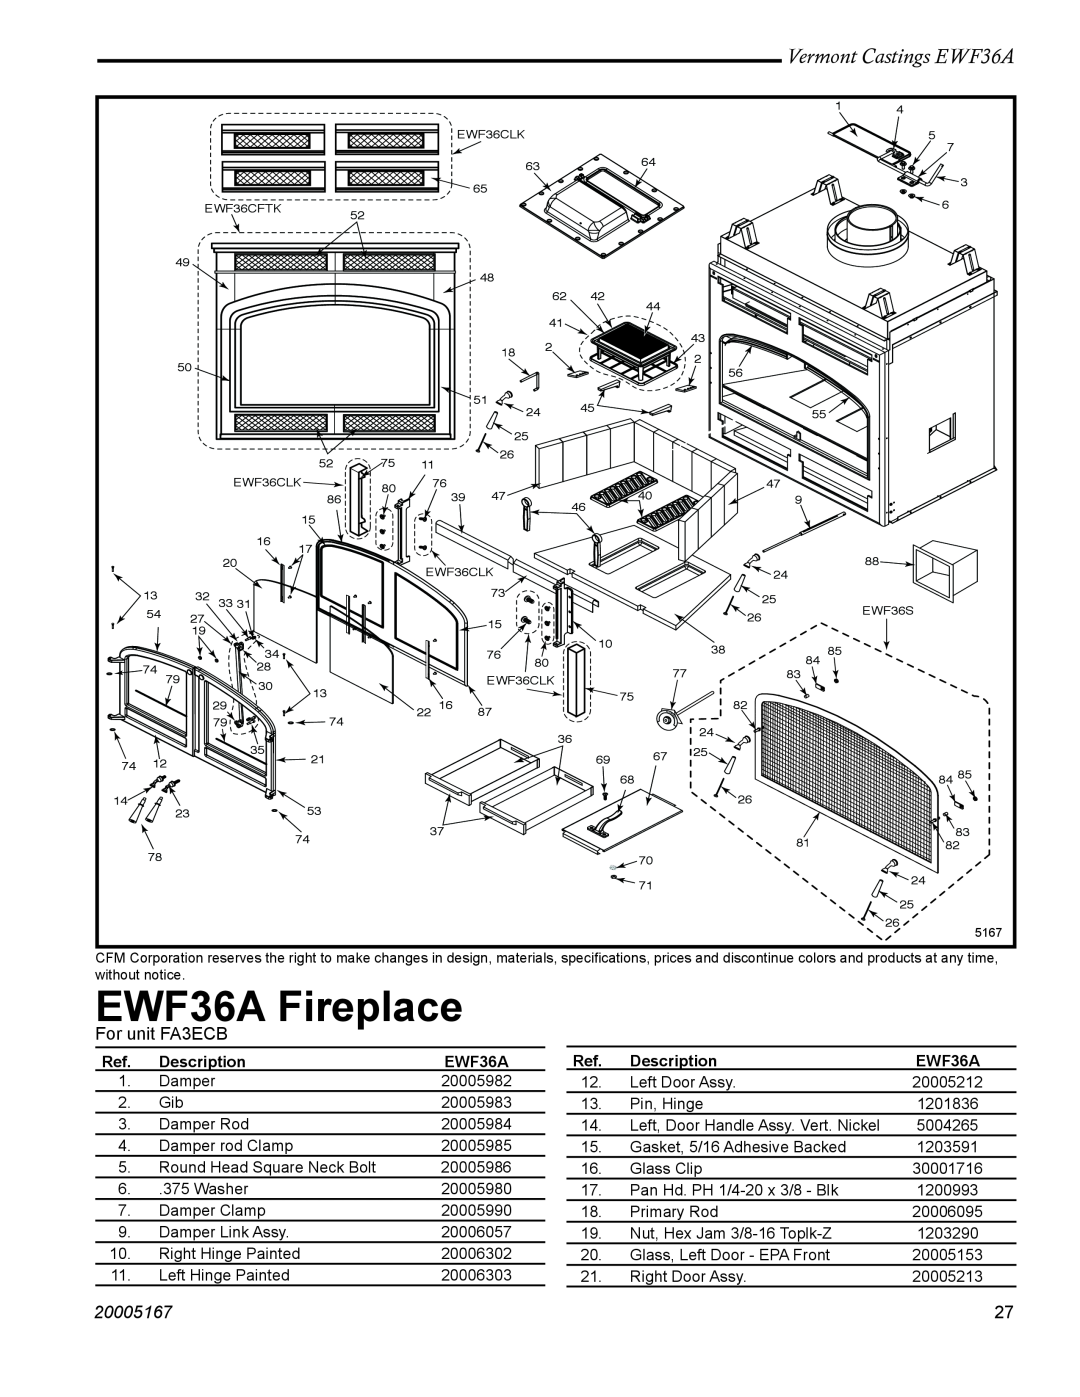 Vermont Casting installation instructions EWF36A Fireplace, Vermont Castings EWF36A, 20005167, Description 